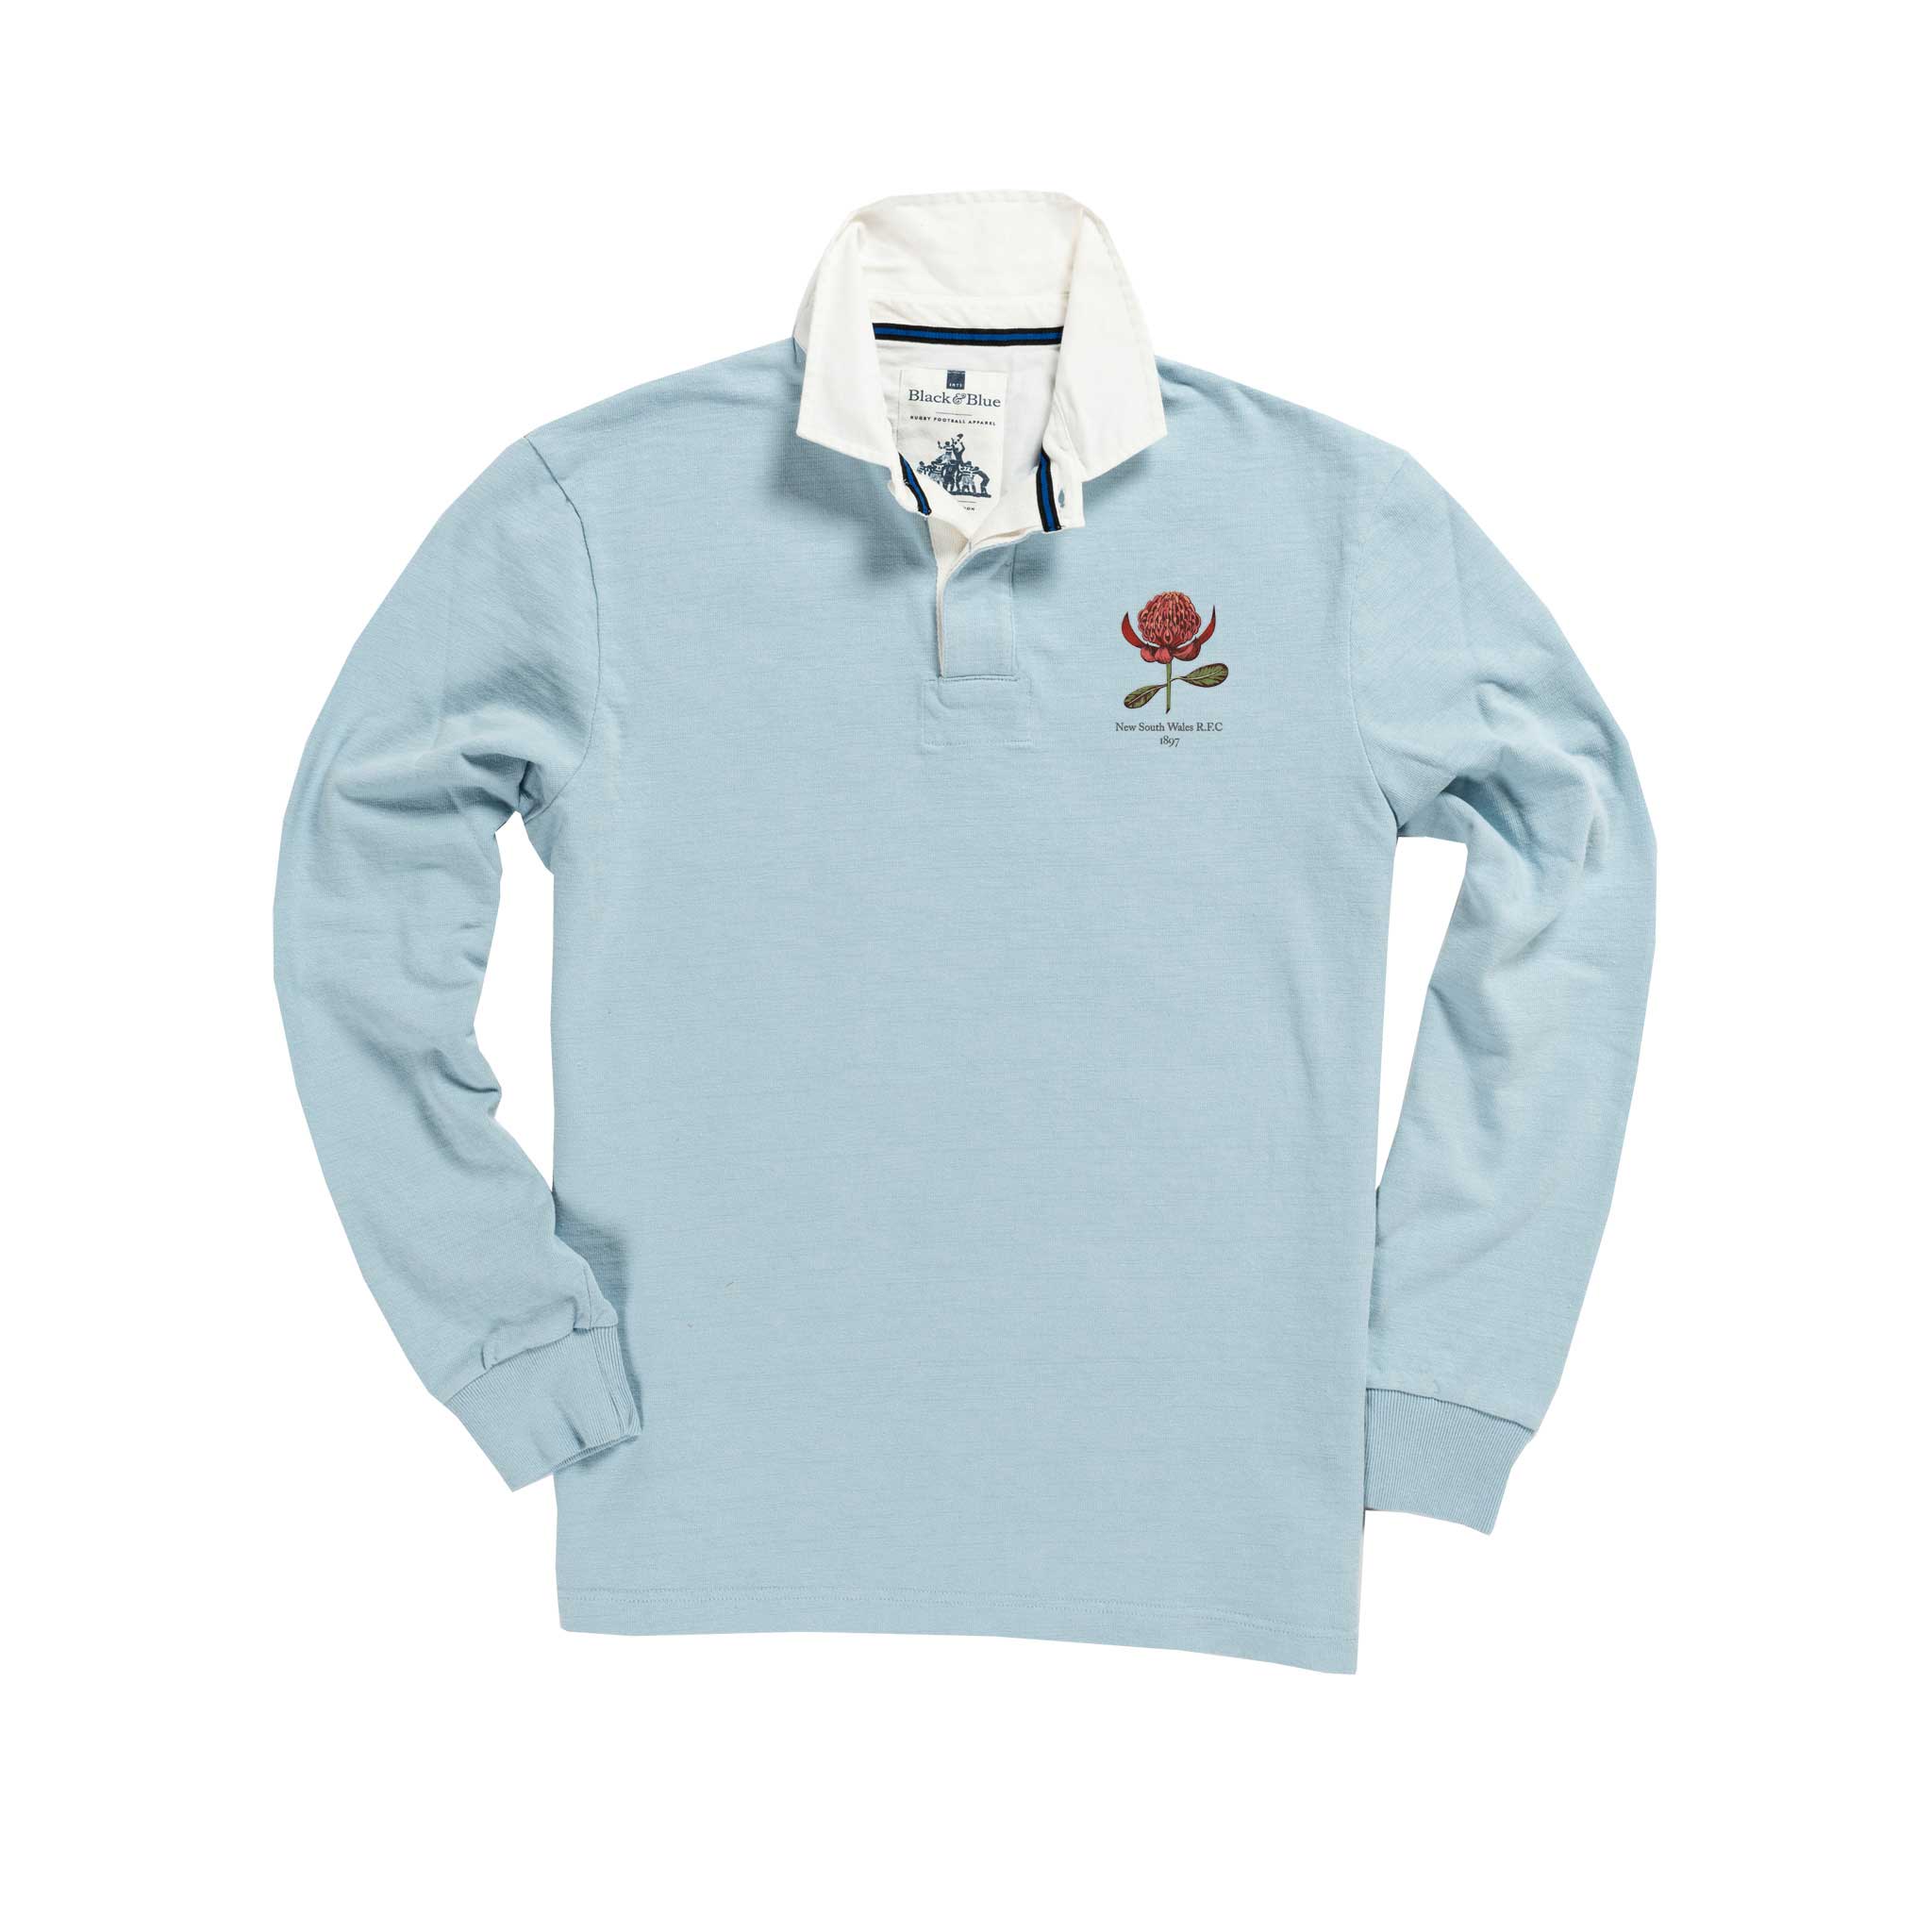 NSW 1897 Rugby Shirt_Front